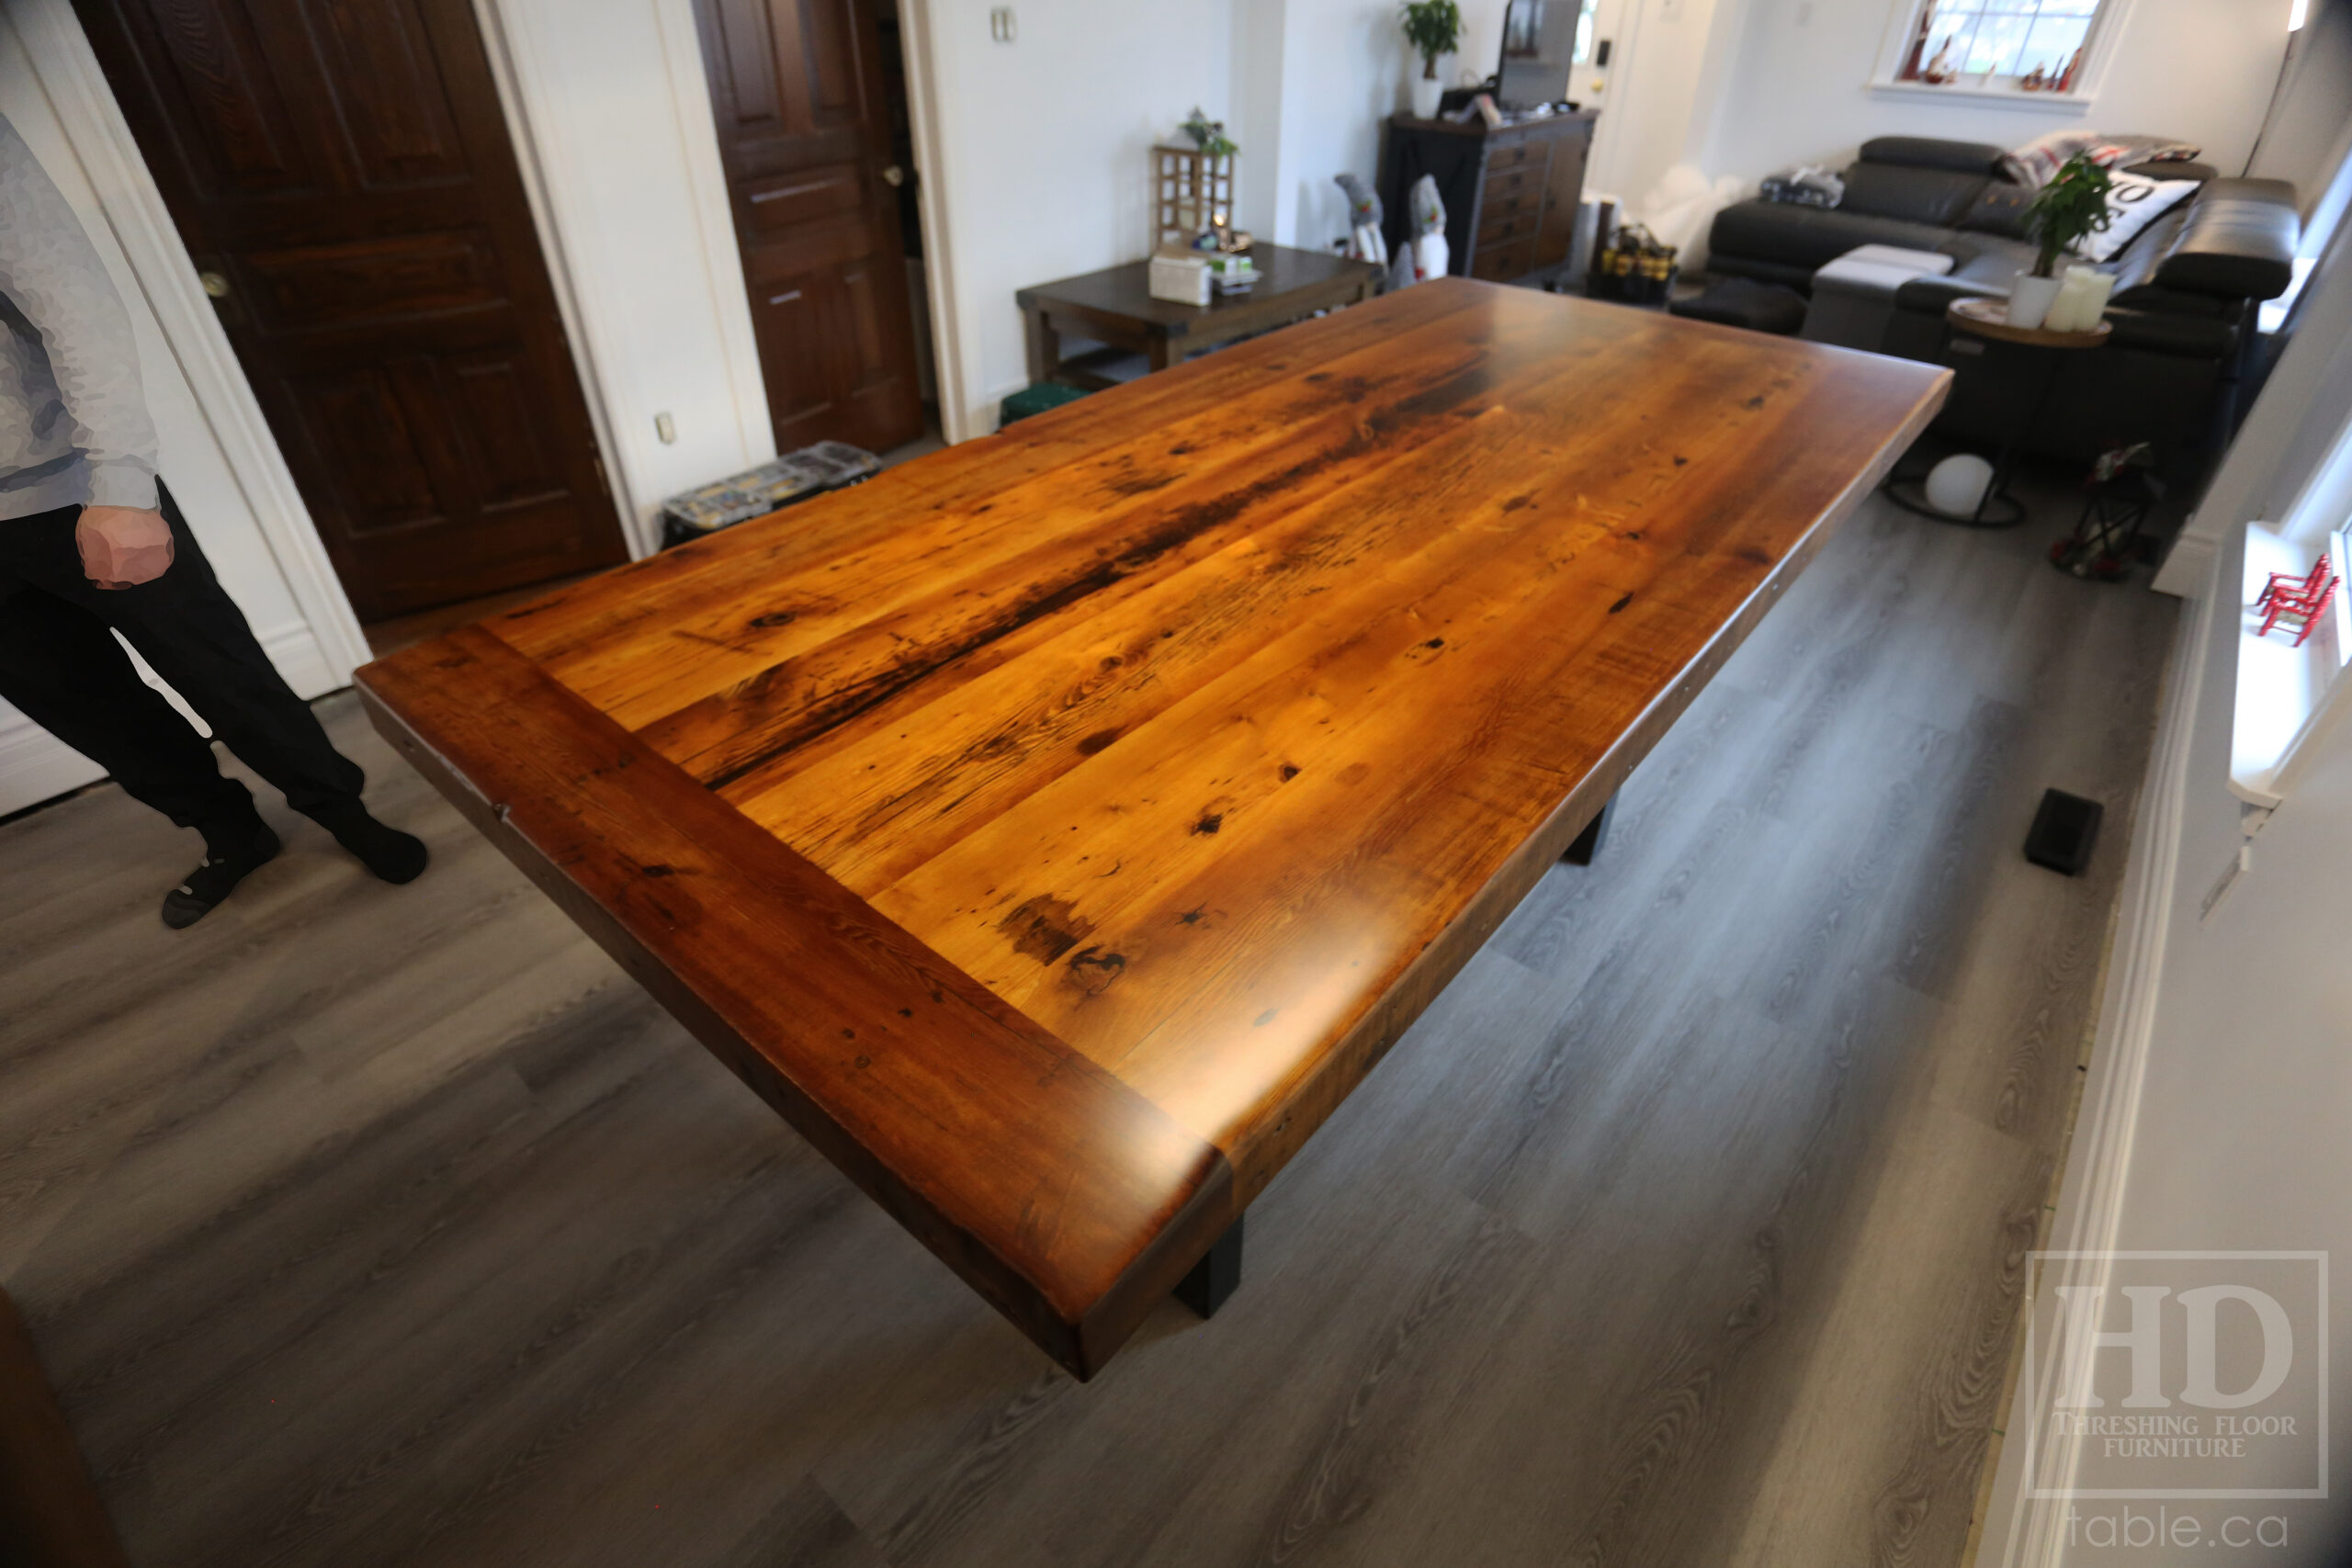 7' Reclaimed Ontario Barnwood Table we made for a Goderich home - 39" wide - 36" height - 3" Joist Material Top Option - Metal U Shaped Matte Black Base - Old Growth Hemlock Threshing Floor Construction - Original edges & distressing maintained - Premium epoxy + satin polyurethane finish - Two 18" Leaves - www.table.ca